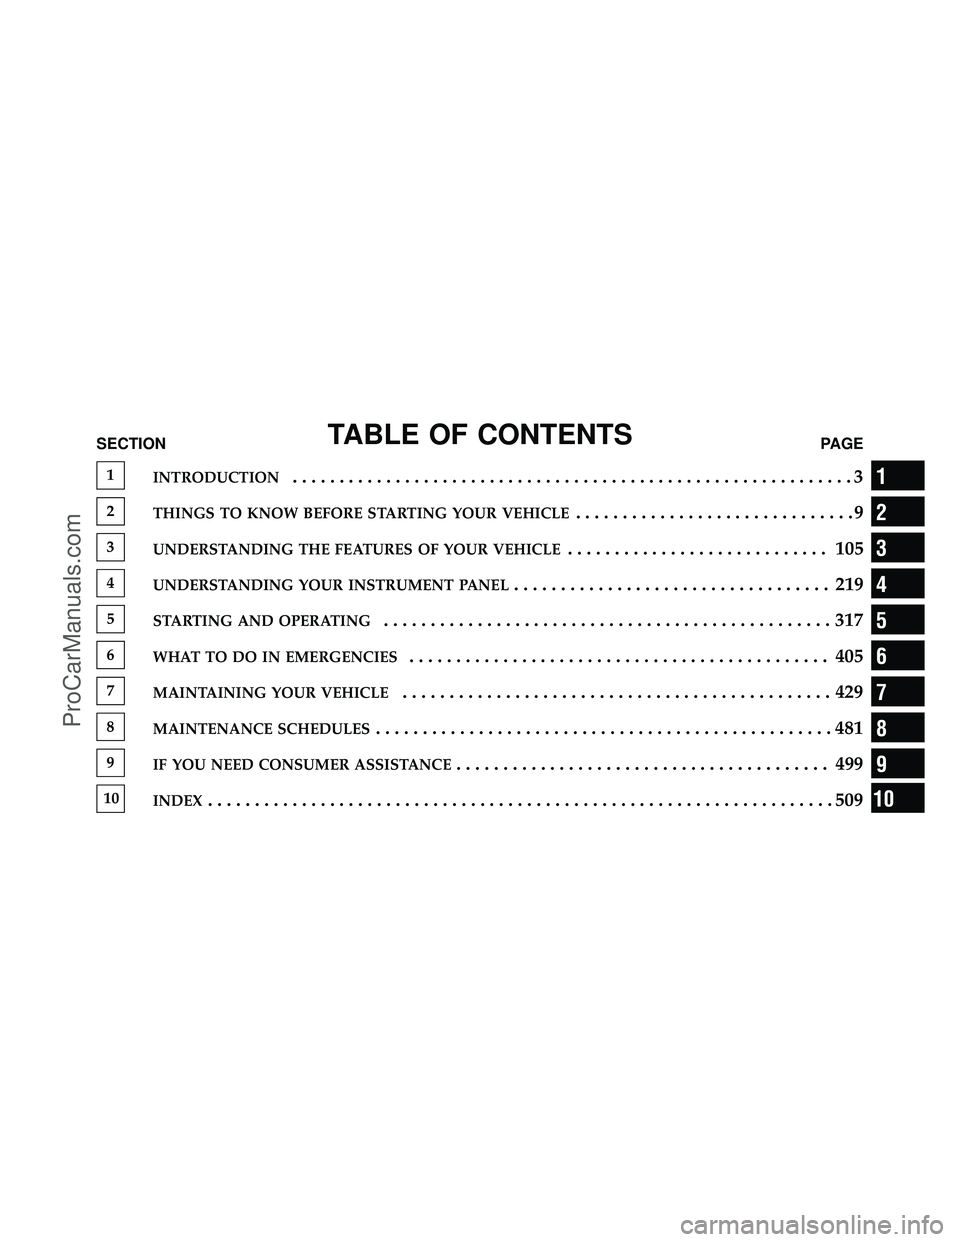 DODGE CARAVAN 2010  Owners Manual TABLE OF CONTENTSSECTIONPAGE
1INTRODUCTION............................................................3
2THINGS TO KNOW BEFORE STARTING YOUR VEHICLE..............................9
3UNDERSTANDING THE F